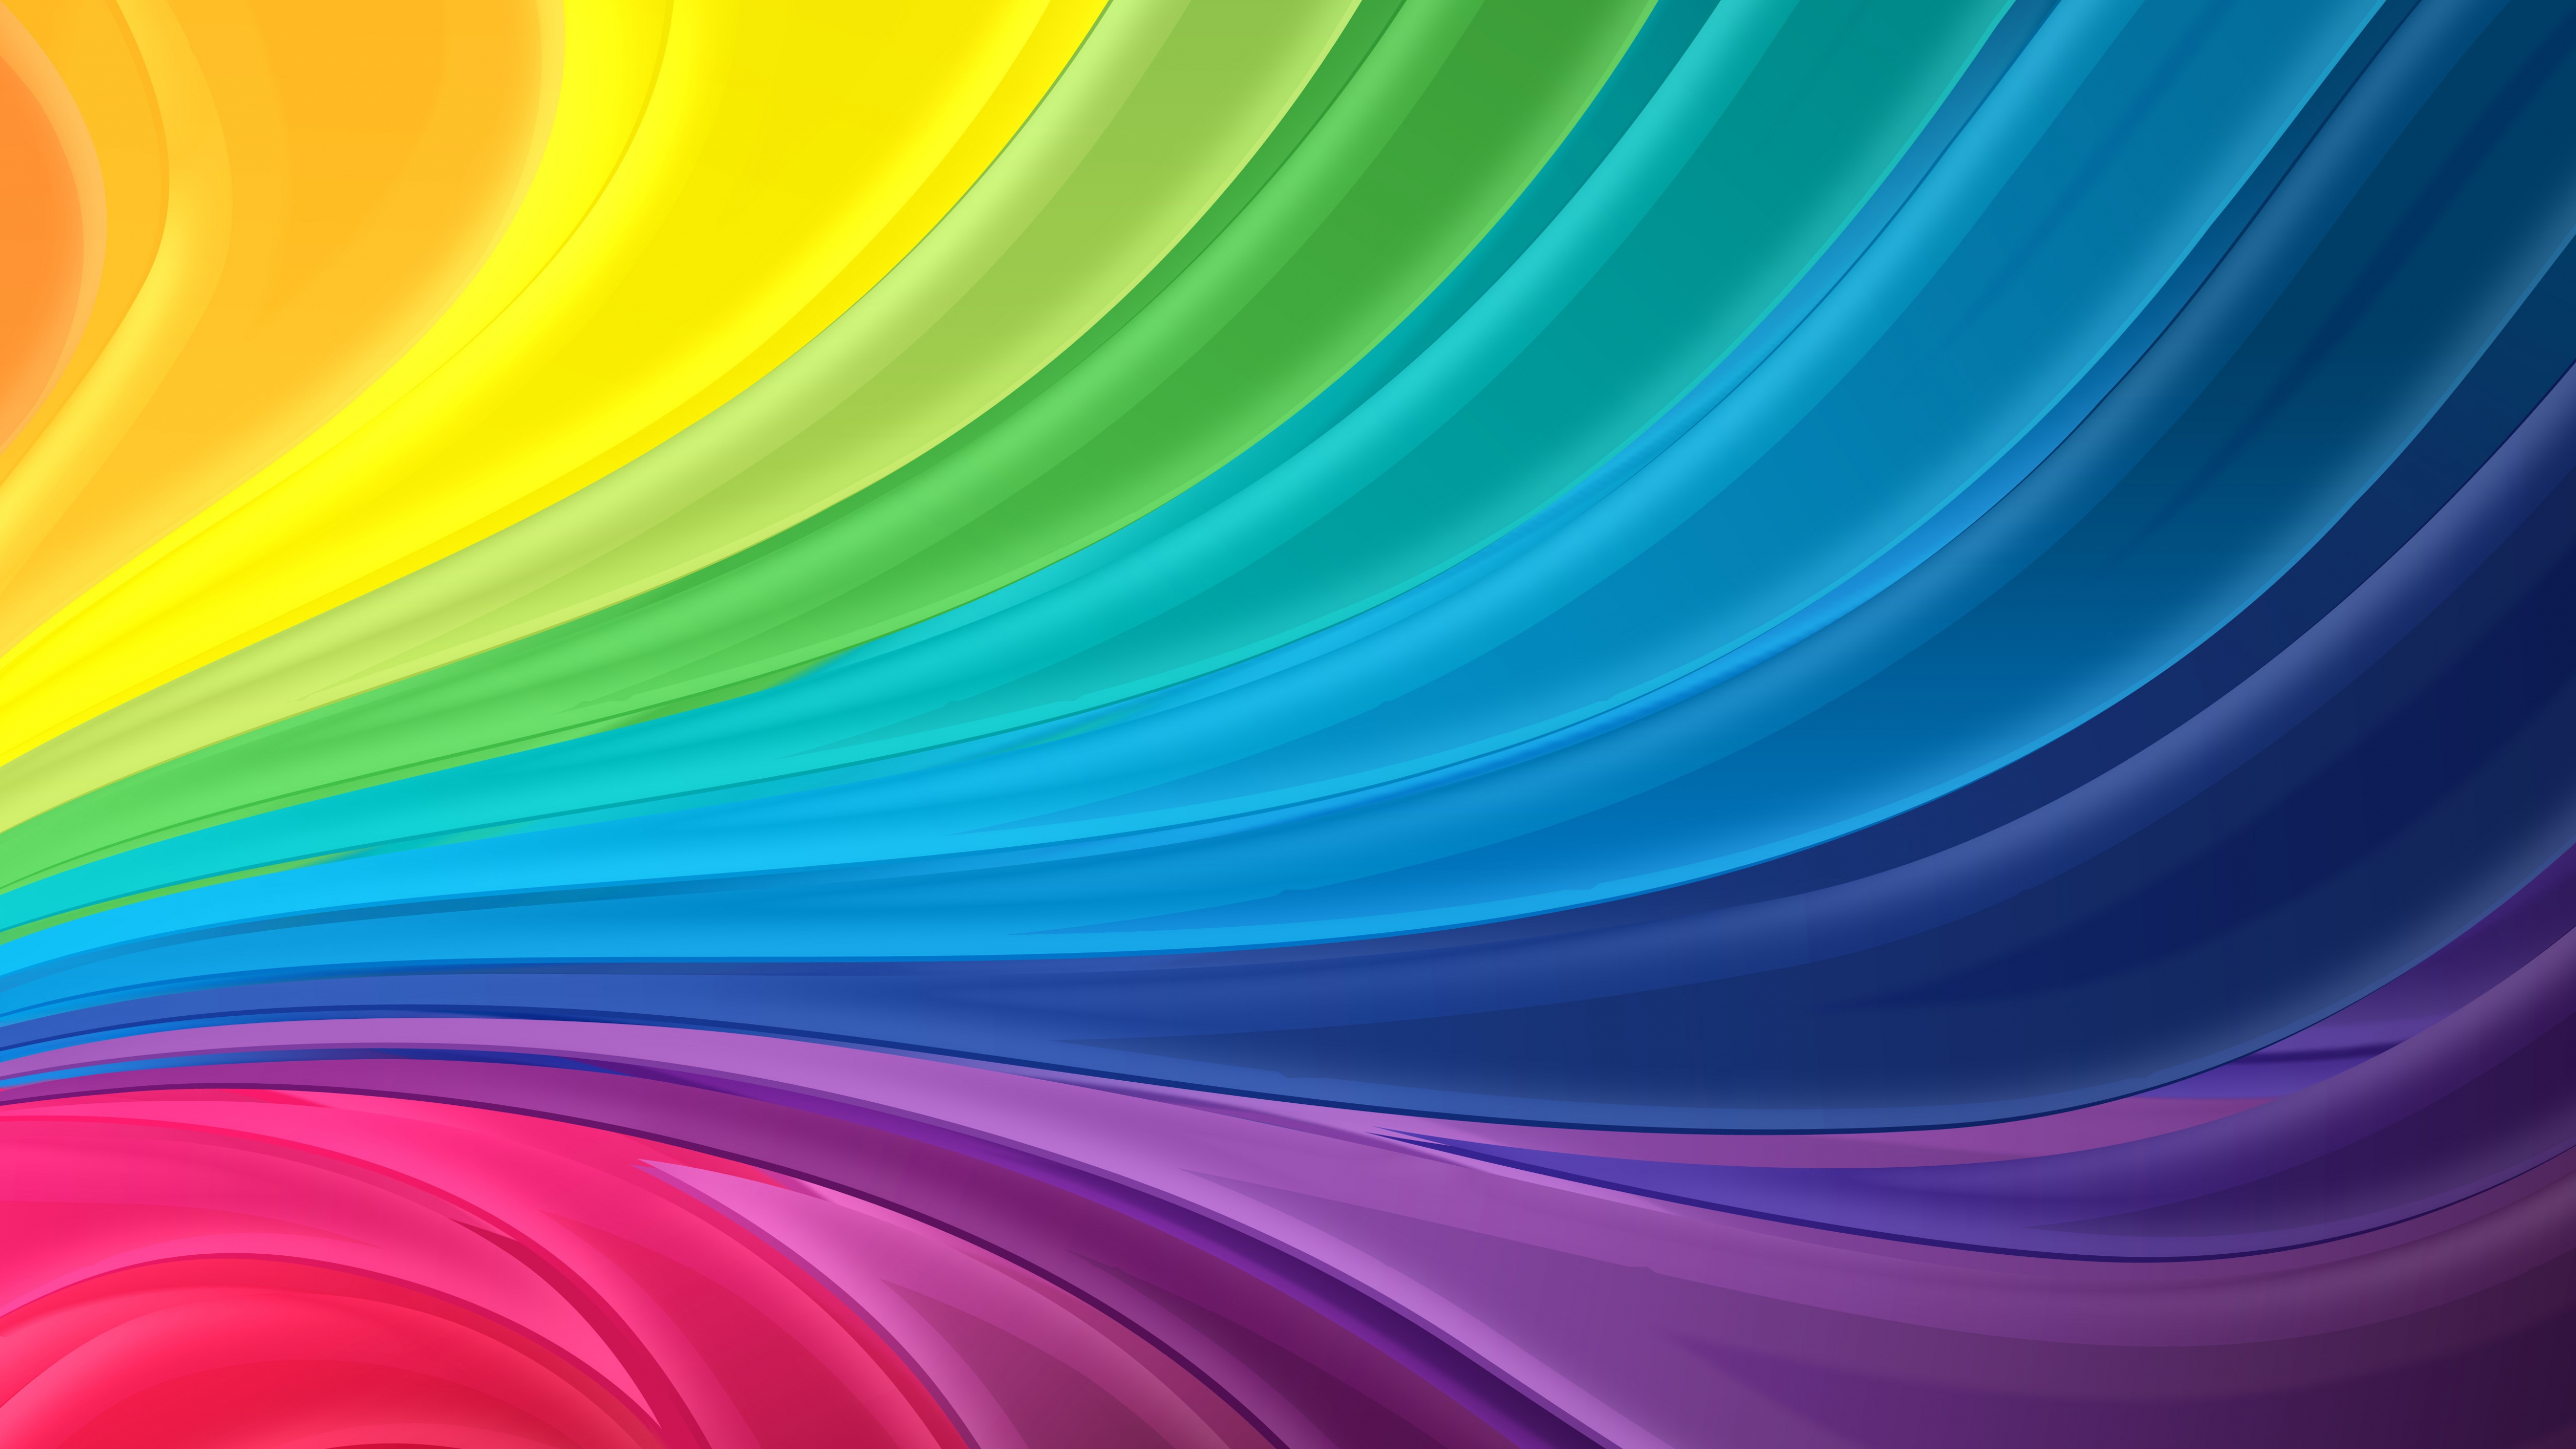 Rainbow colors Wallpaper 4K, Colorful, Multi color, Waves, Aesthetic, 5K,  Abstract, #1765